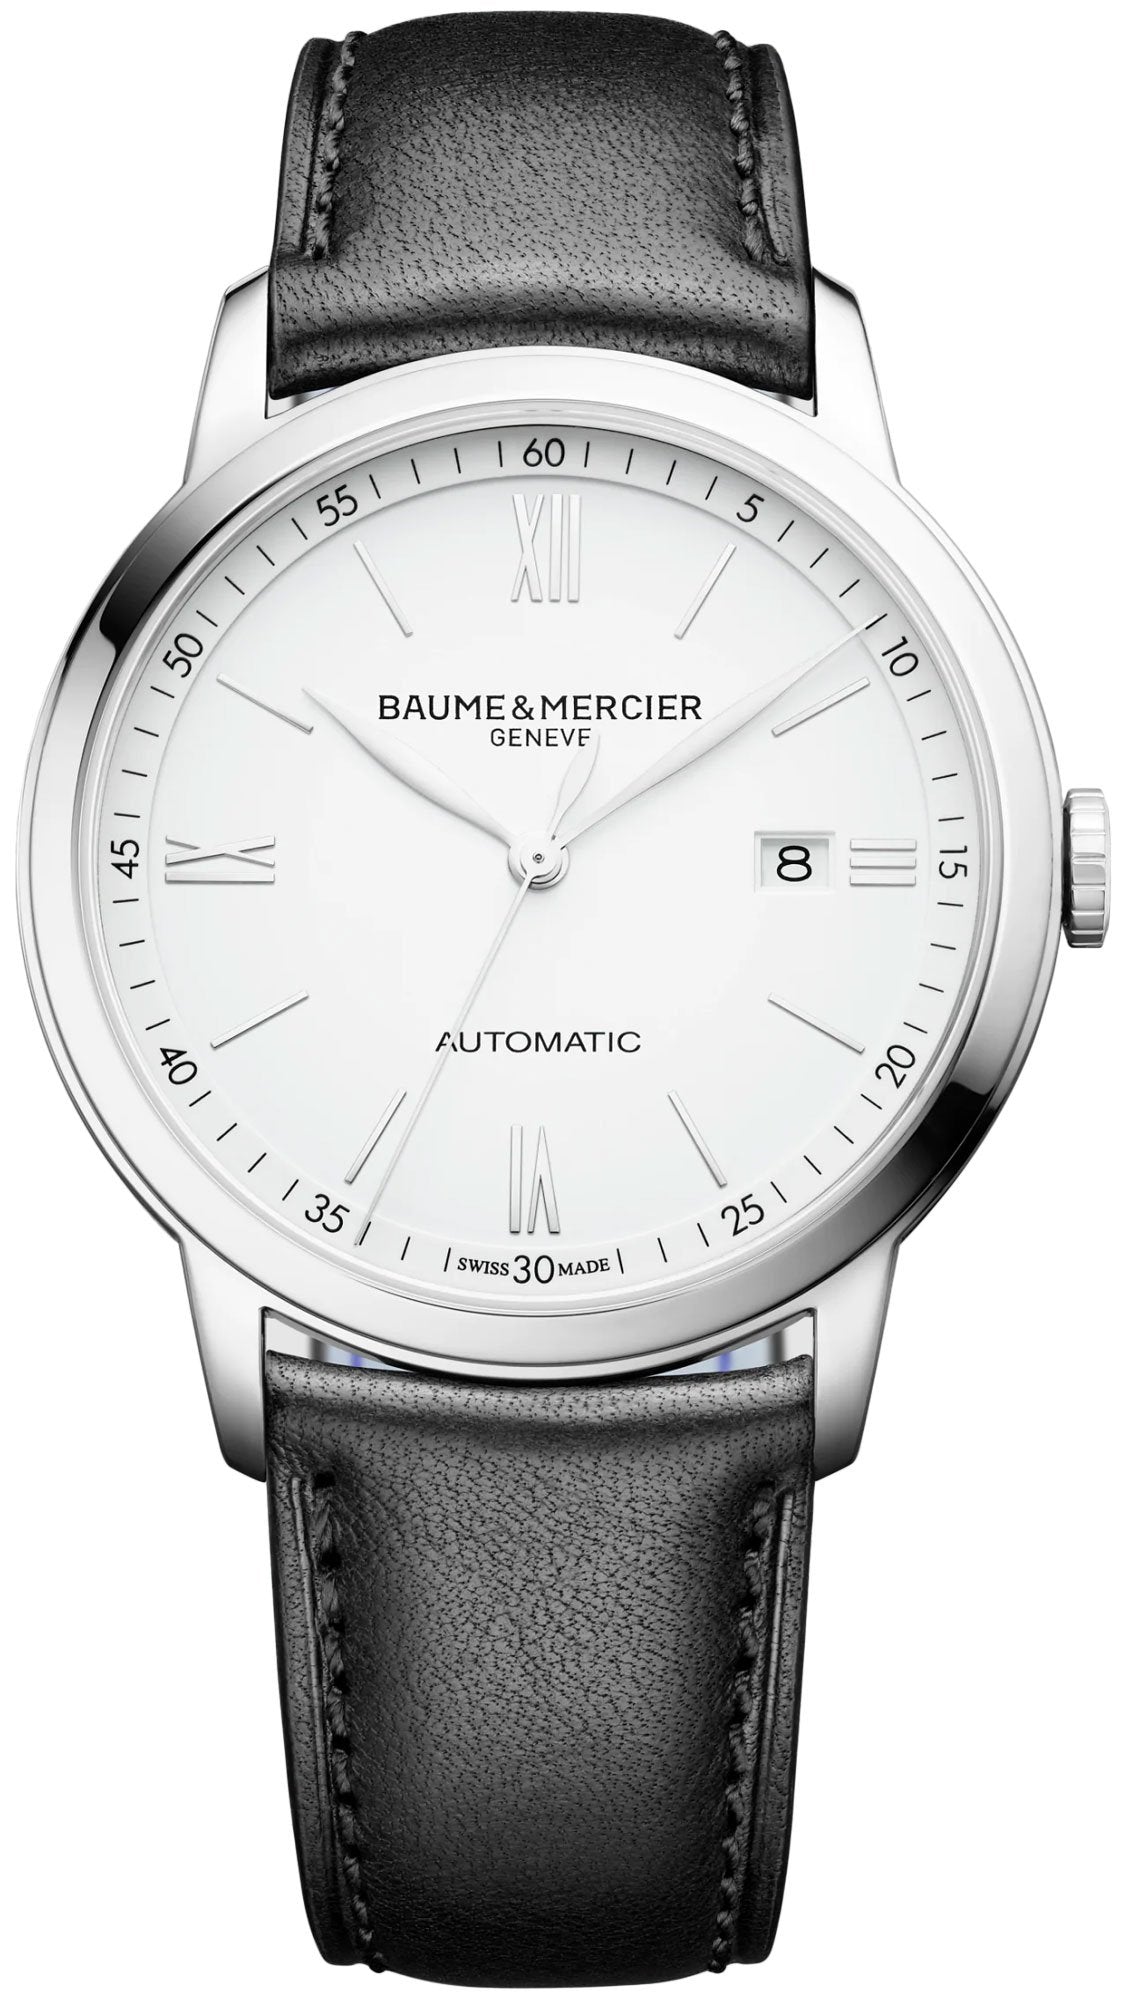 Watches - Mens-Baume & Mercier-M0A10332-40 - 45 mm, Baume & Mercier, Classima, date, leather, mens, menswatches, new arrivals, round, stainless steel case, swiss automatic, watches, white-Watches & Beyond